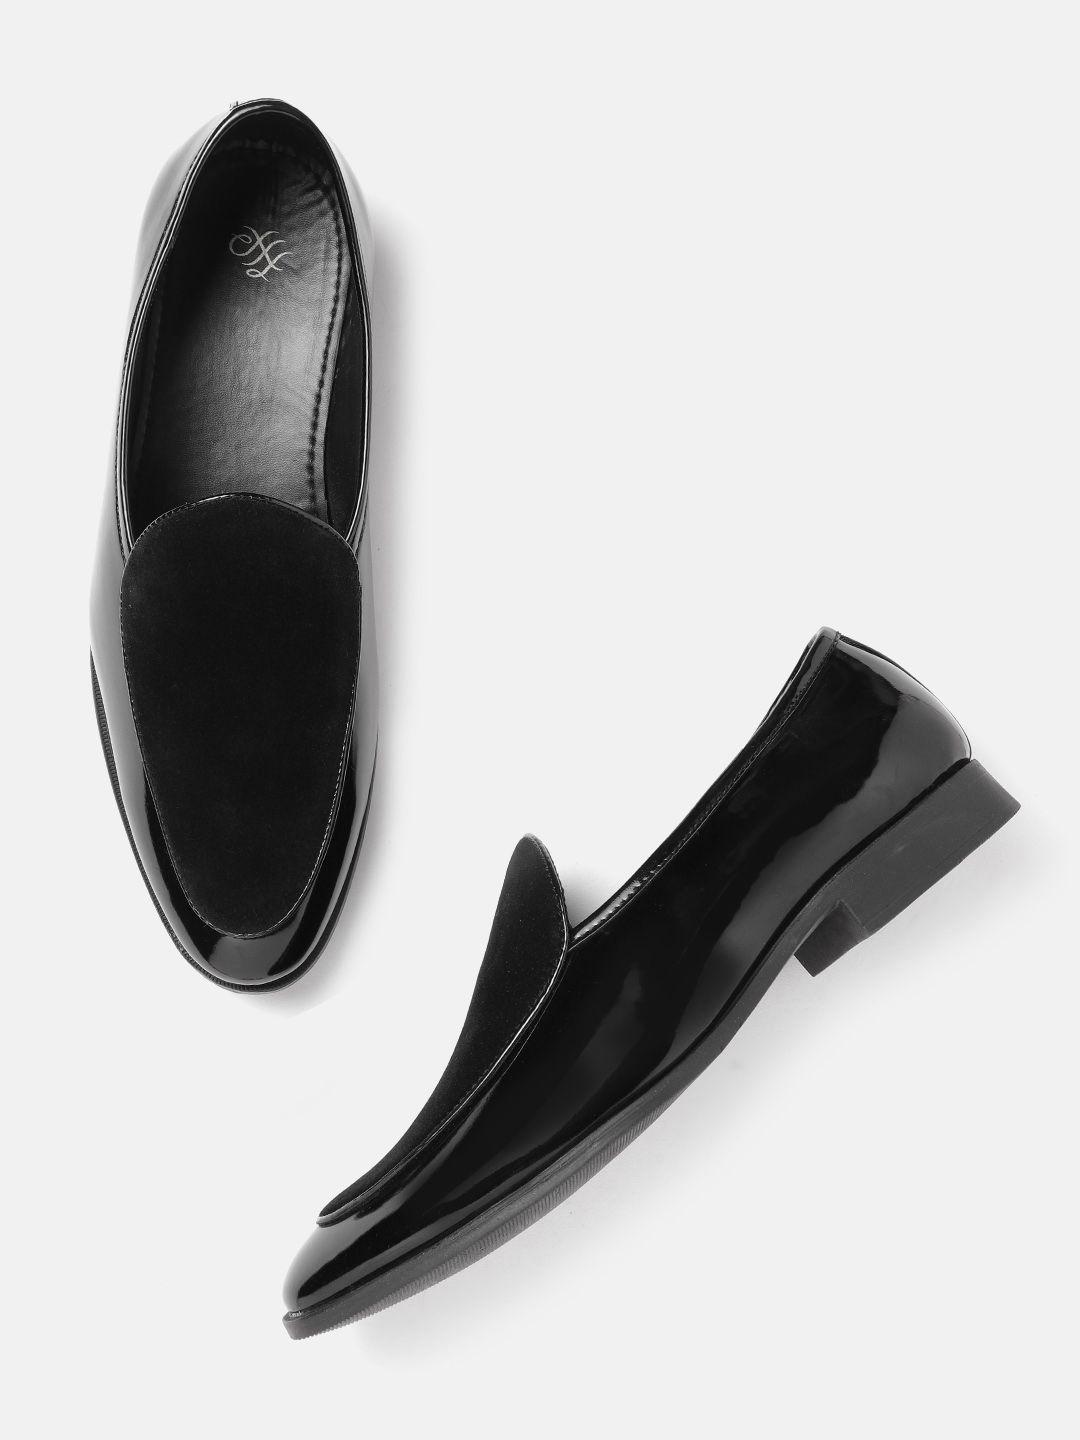 house-of-pataudi-men-black-patent-finish-handcrafted-formal-slip-ons